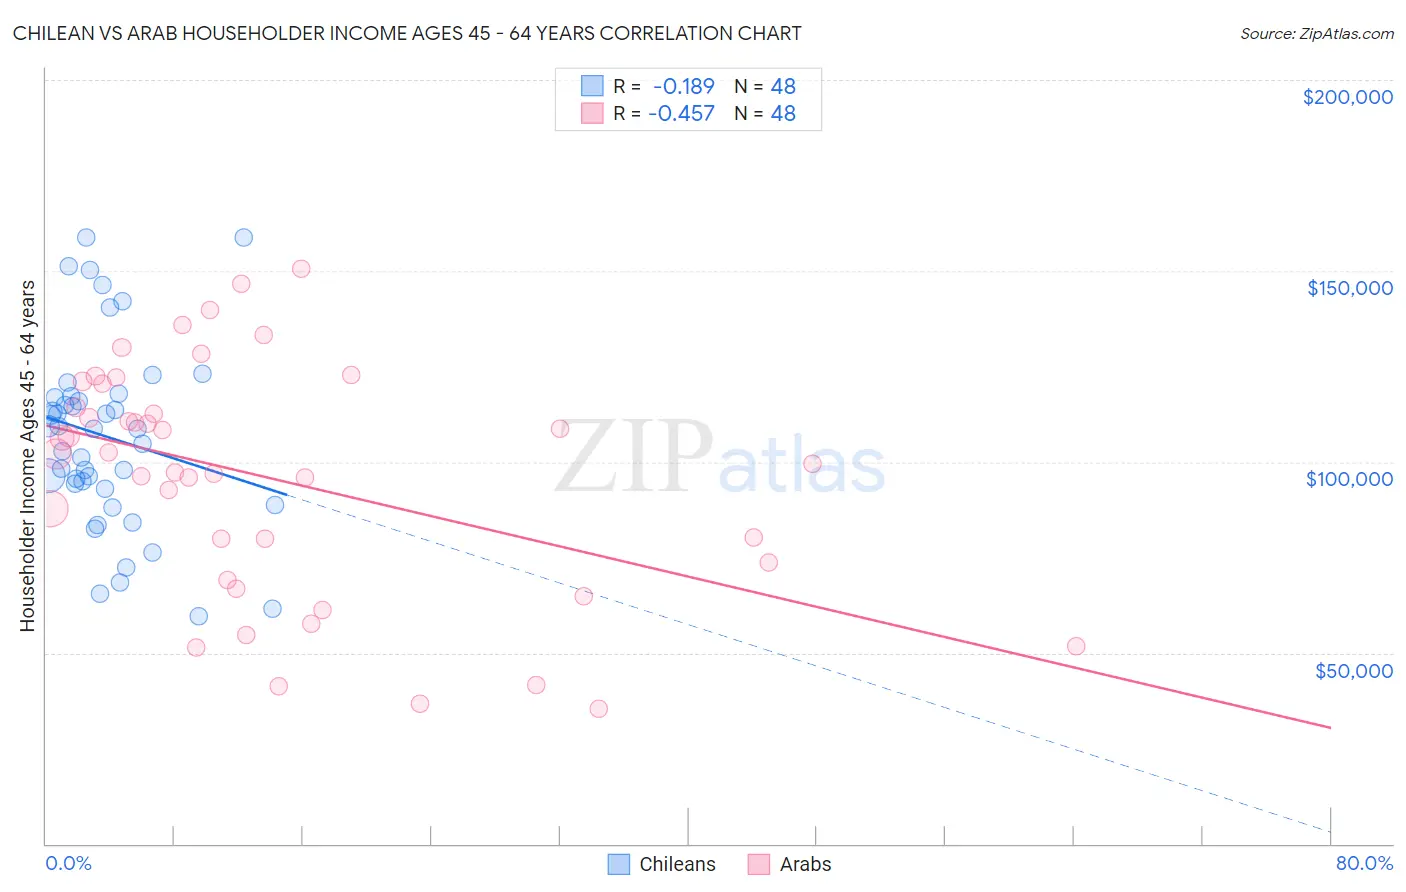 Chilean vs Arab Householder Income Ages 45 - 64 years